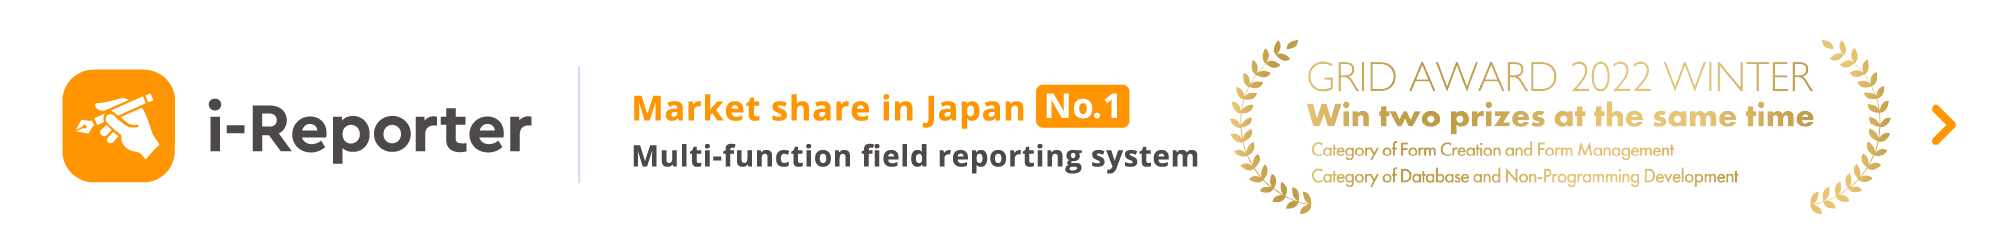 i-Reporter: Market share in Japan No.1, Multi-function field reporting system